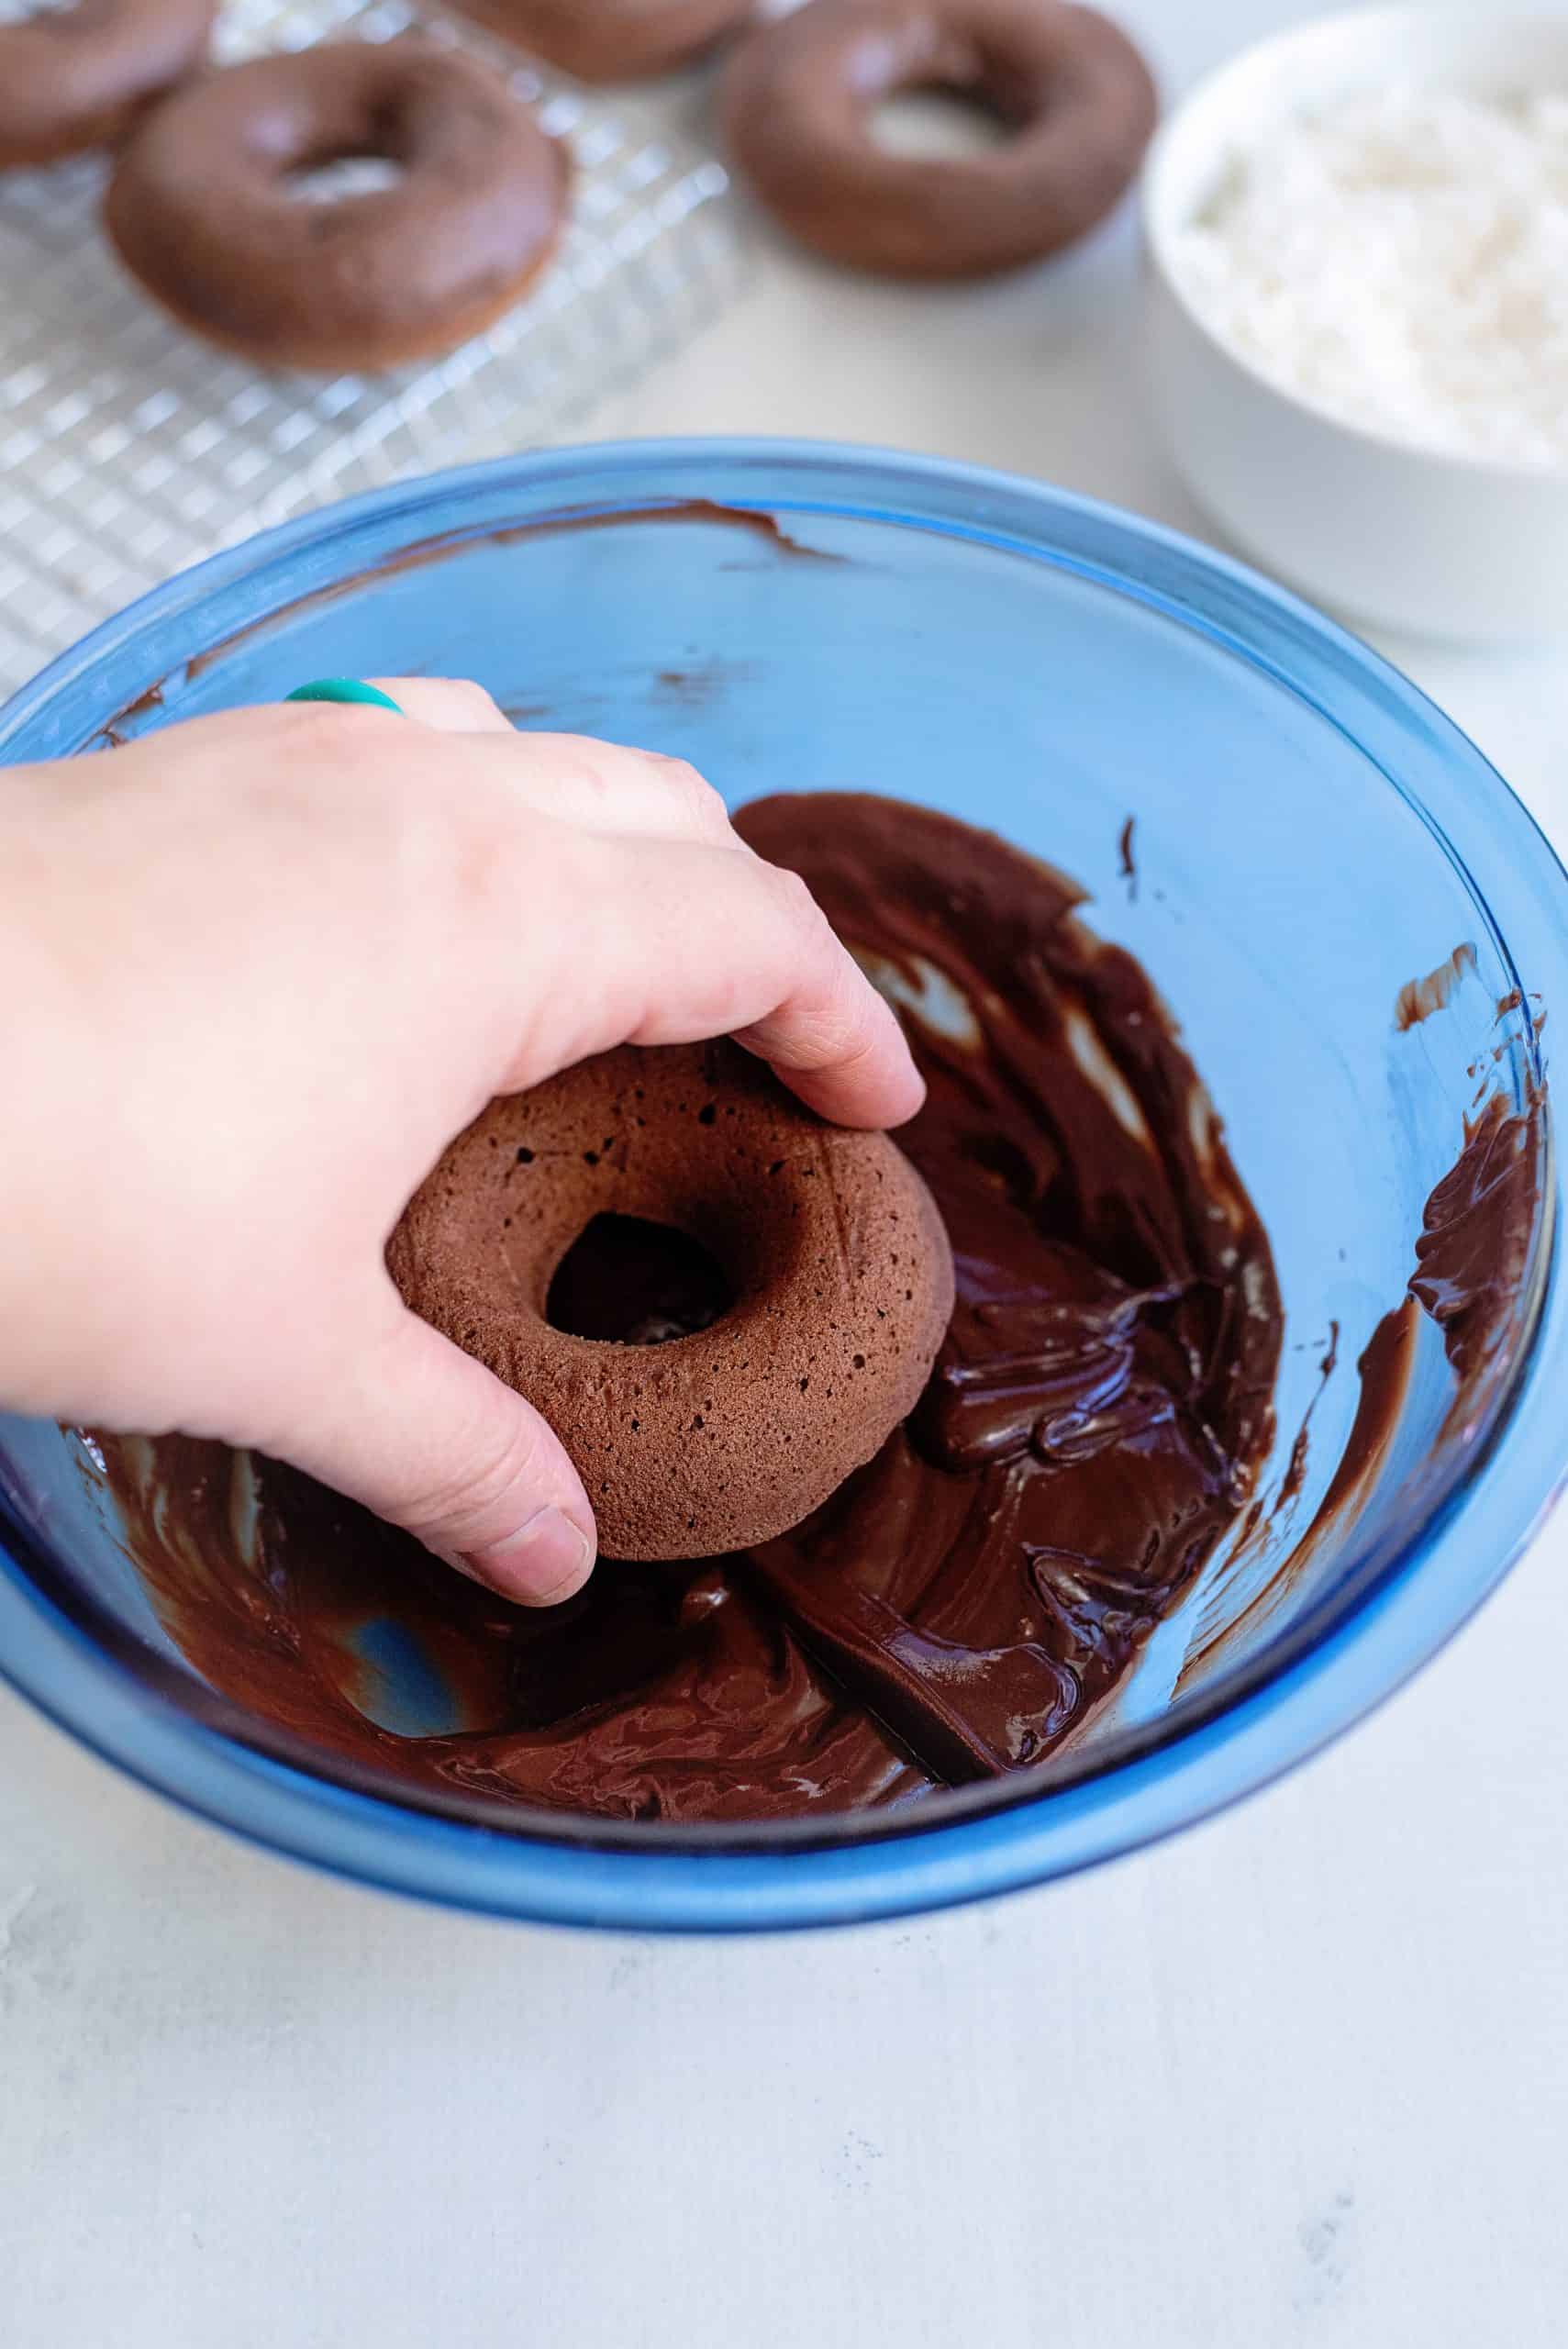 Hand dipping baked donut into chocolate